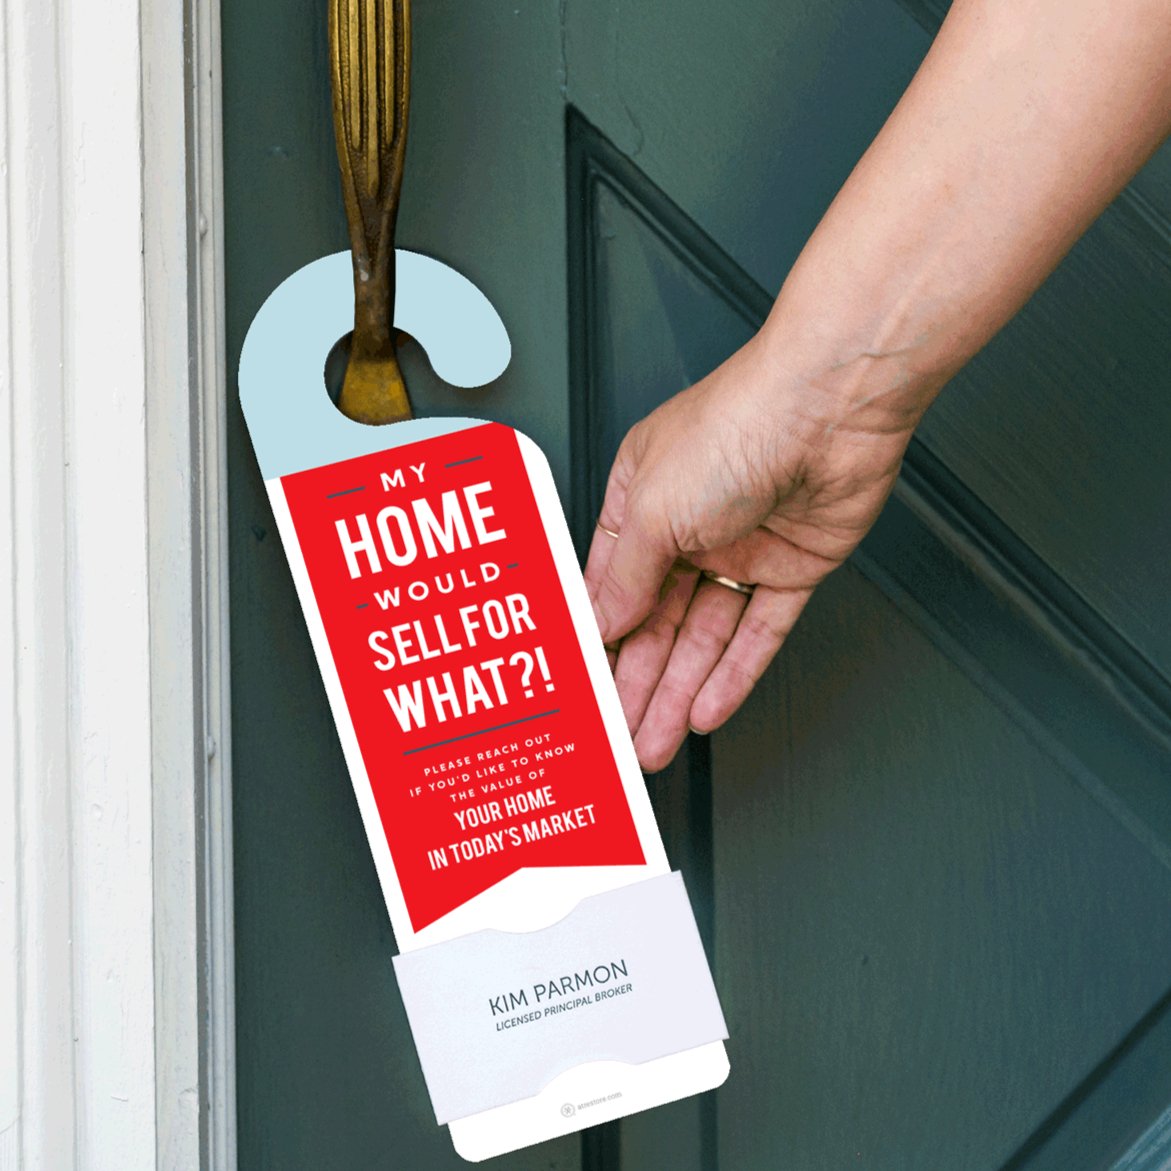 Door Hanger - Home Worth No.1 - All Things Real Estate